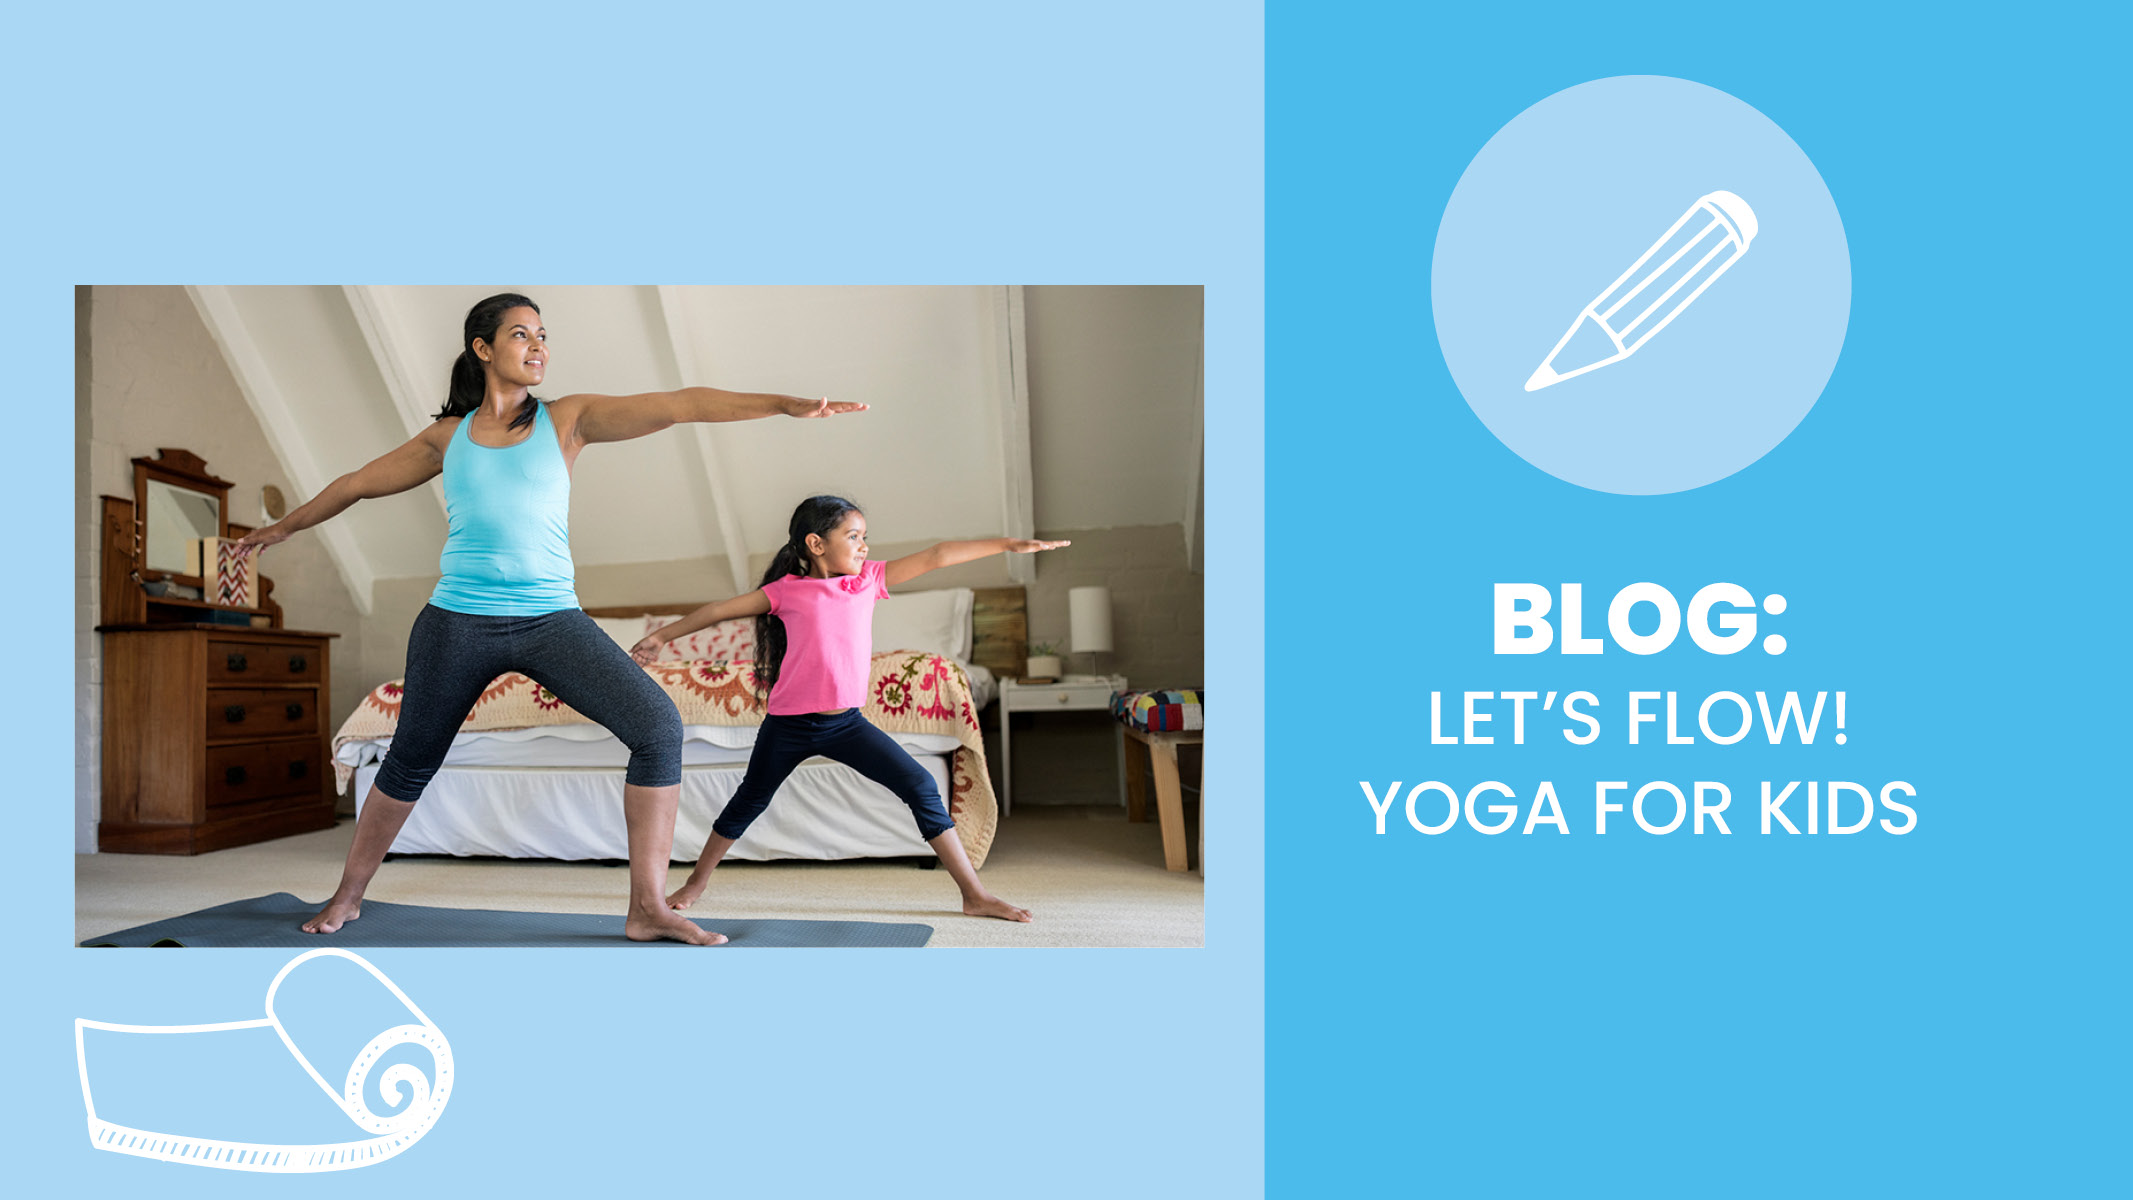 Mother and daughter practice kid-friendly yoga